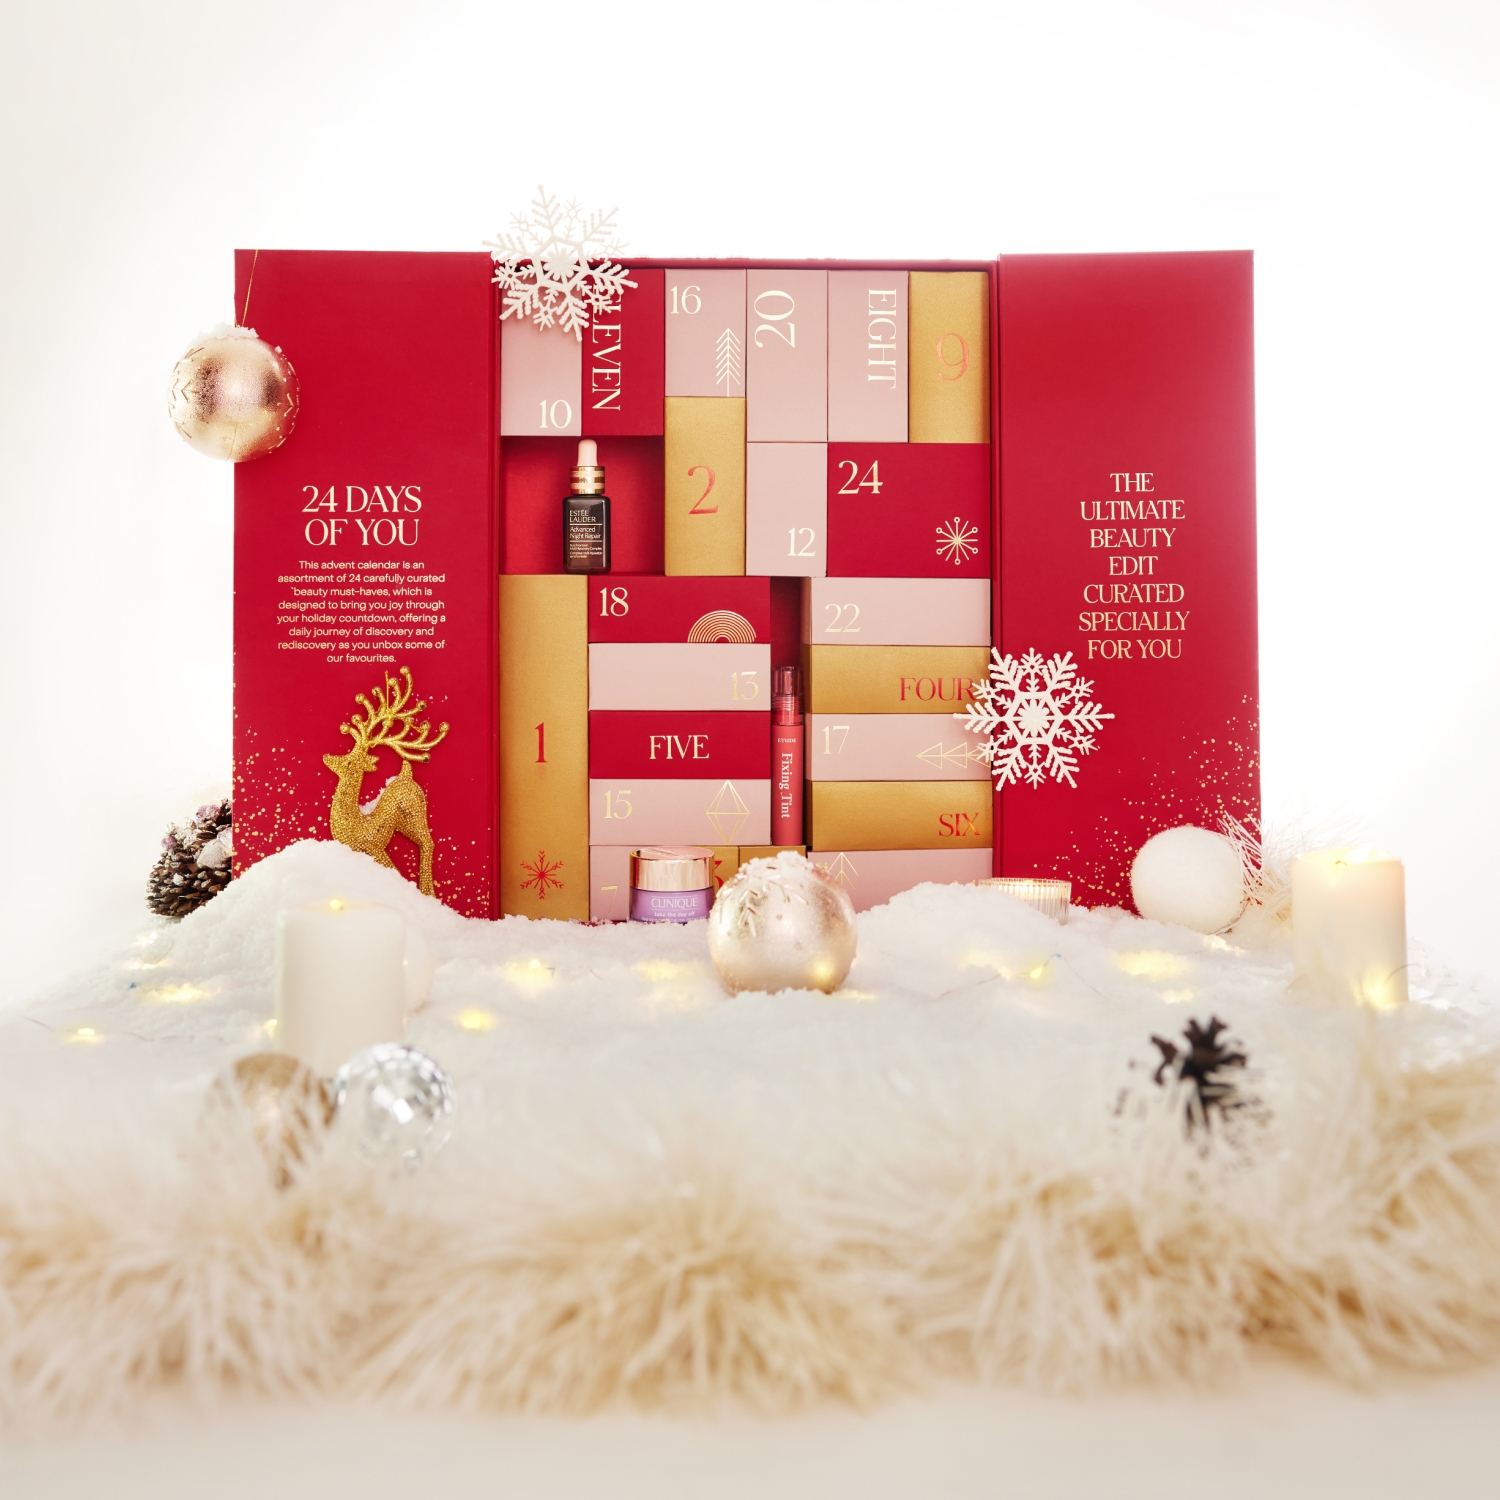 Buy 24 Days of You - Advent Calendar (worth over ₹45,000) - Tira, Tira:  Shop Makeup, Skin, Hair & Beauty Products Online